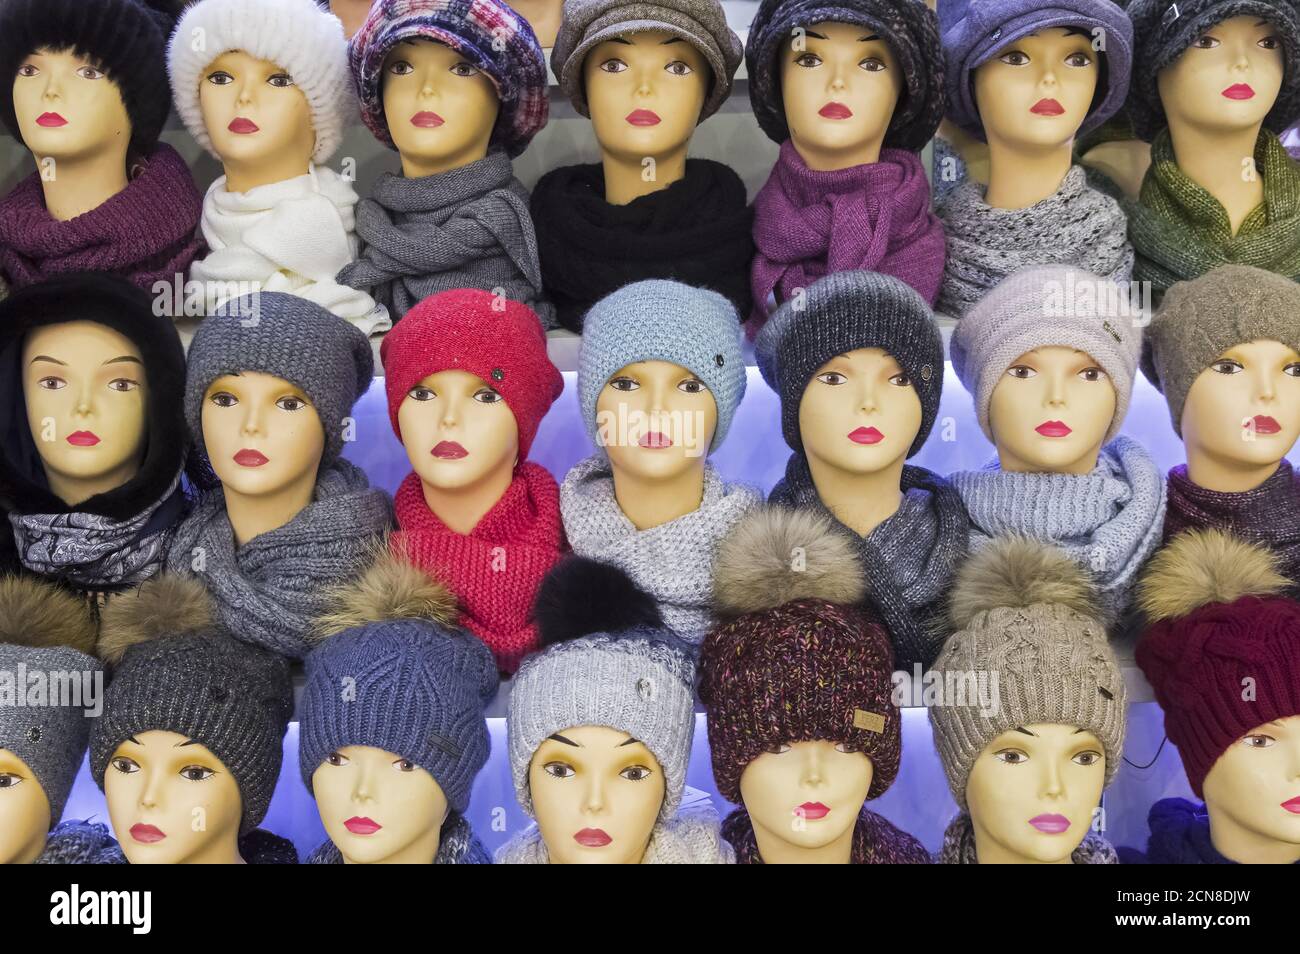 Mannequin heads in knitted hats and scarves. Stock Photo